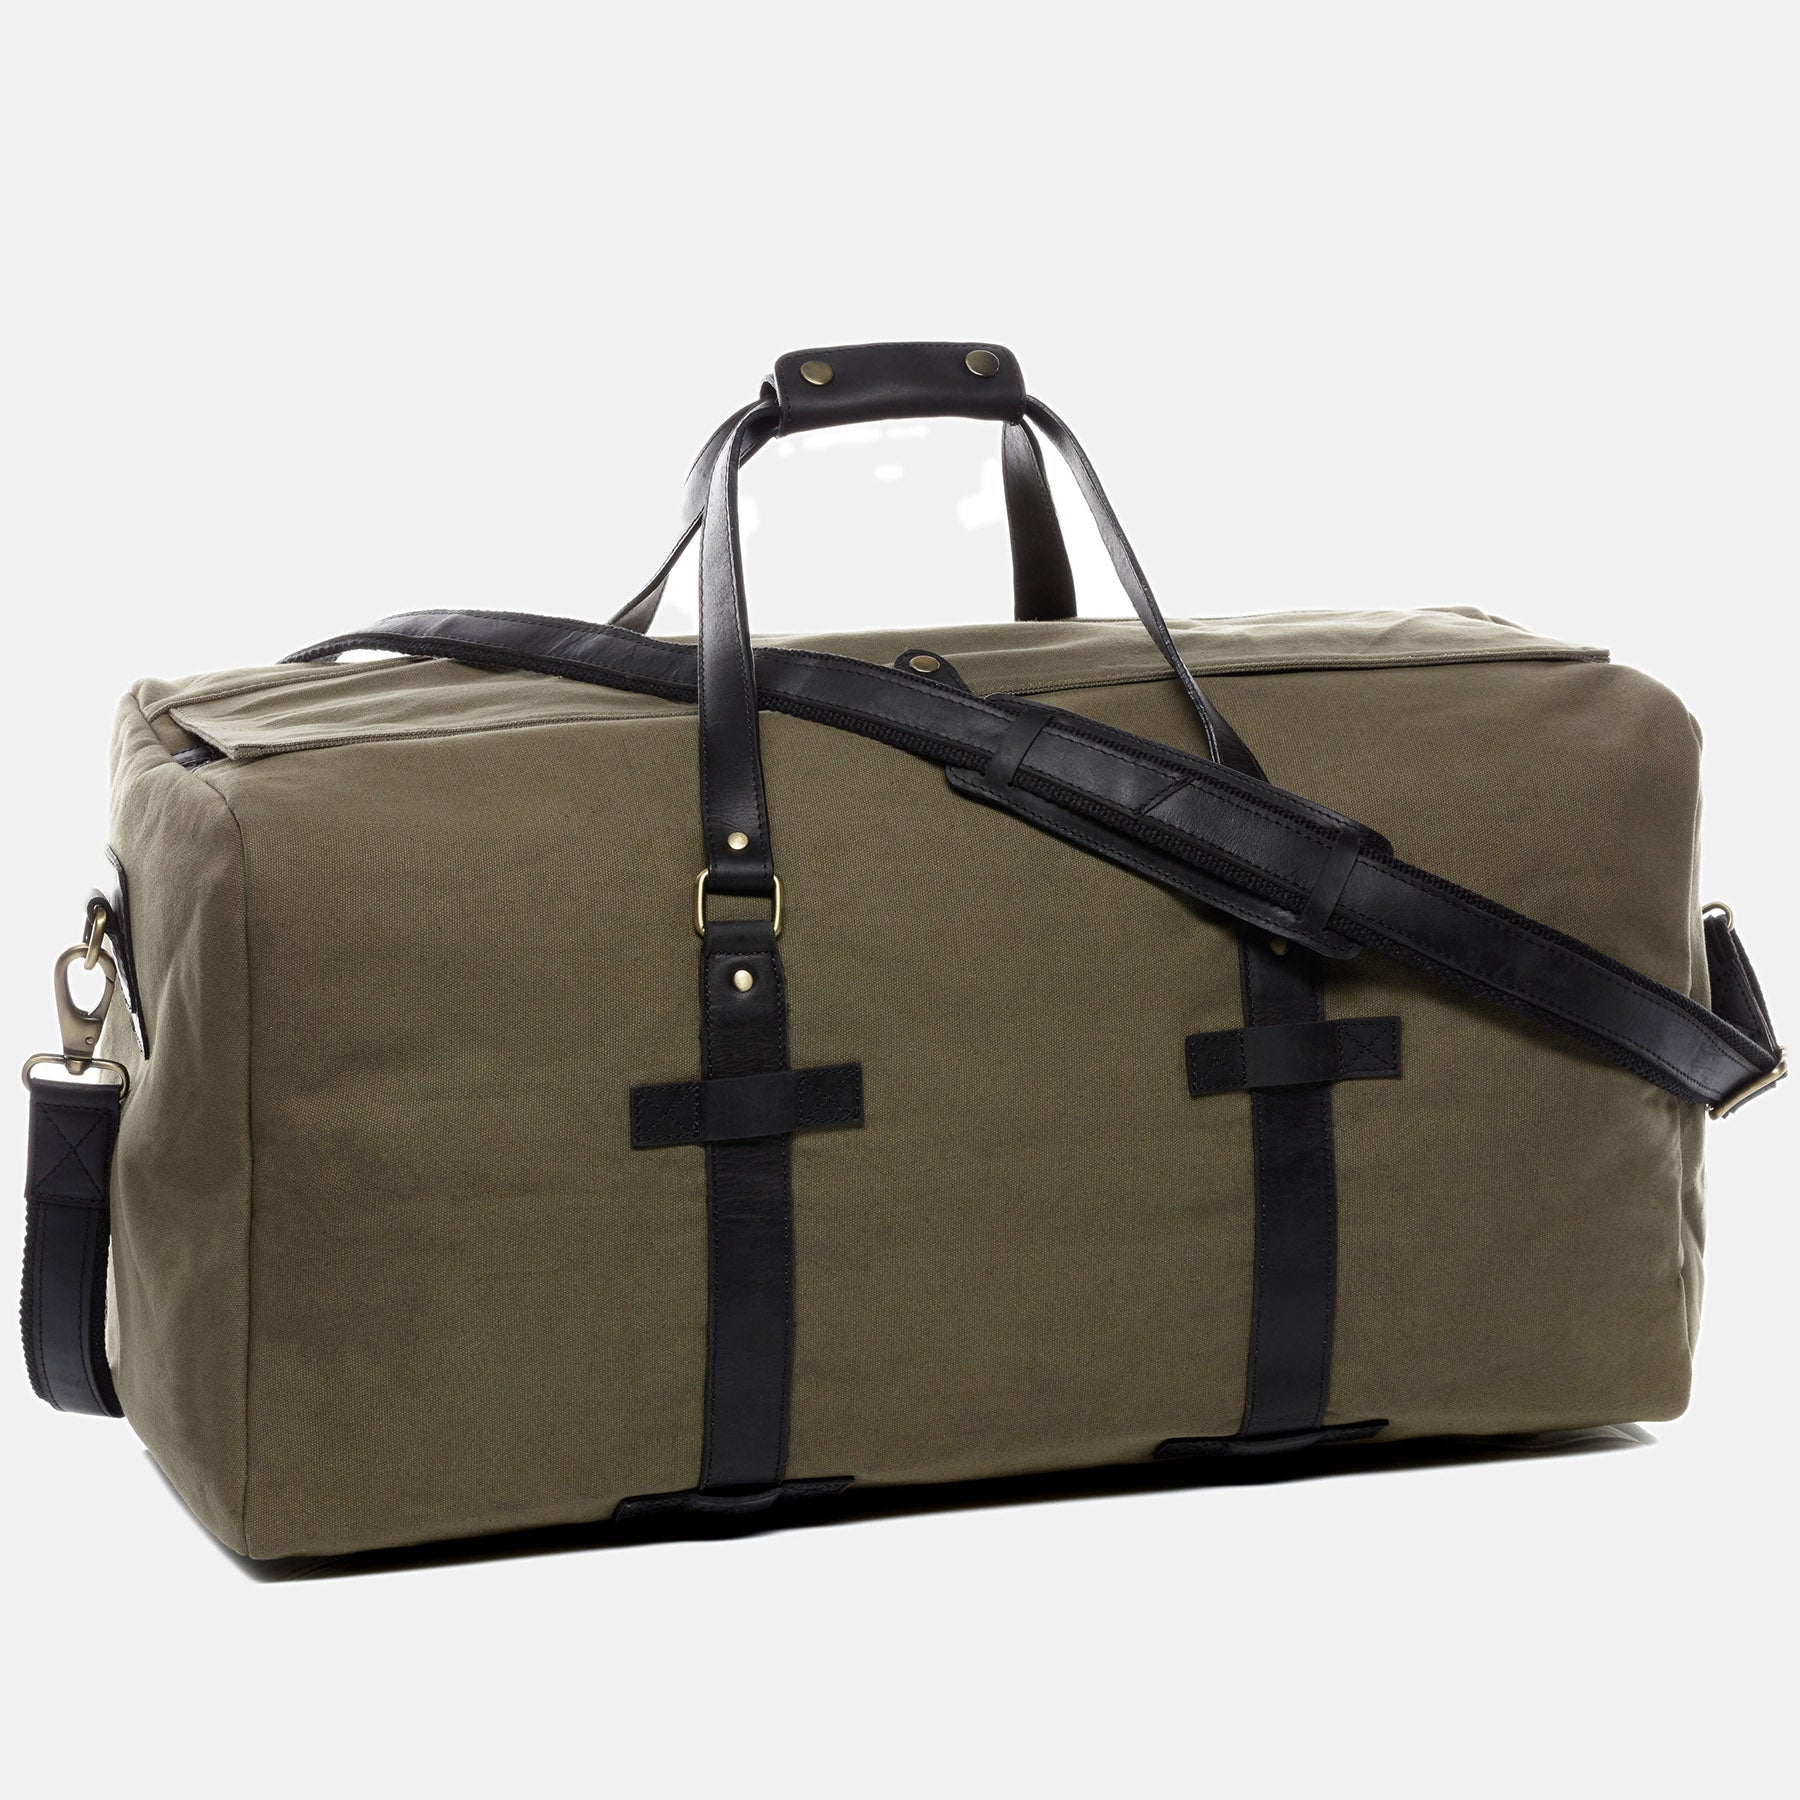 XL Travel bag CHASE Canvas&Leather olive-green